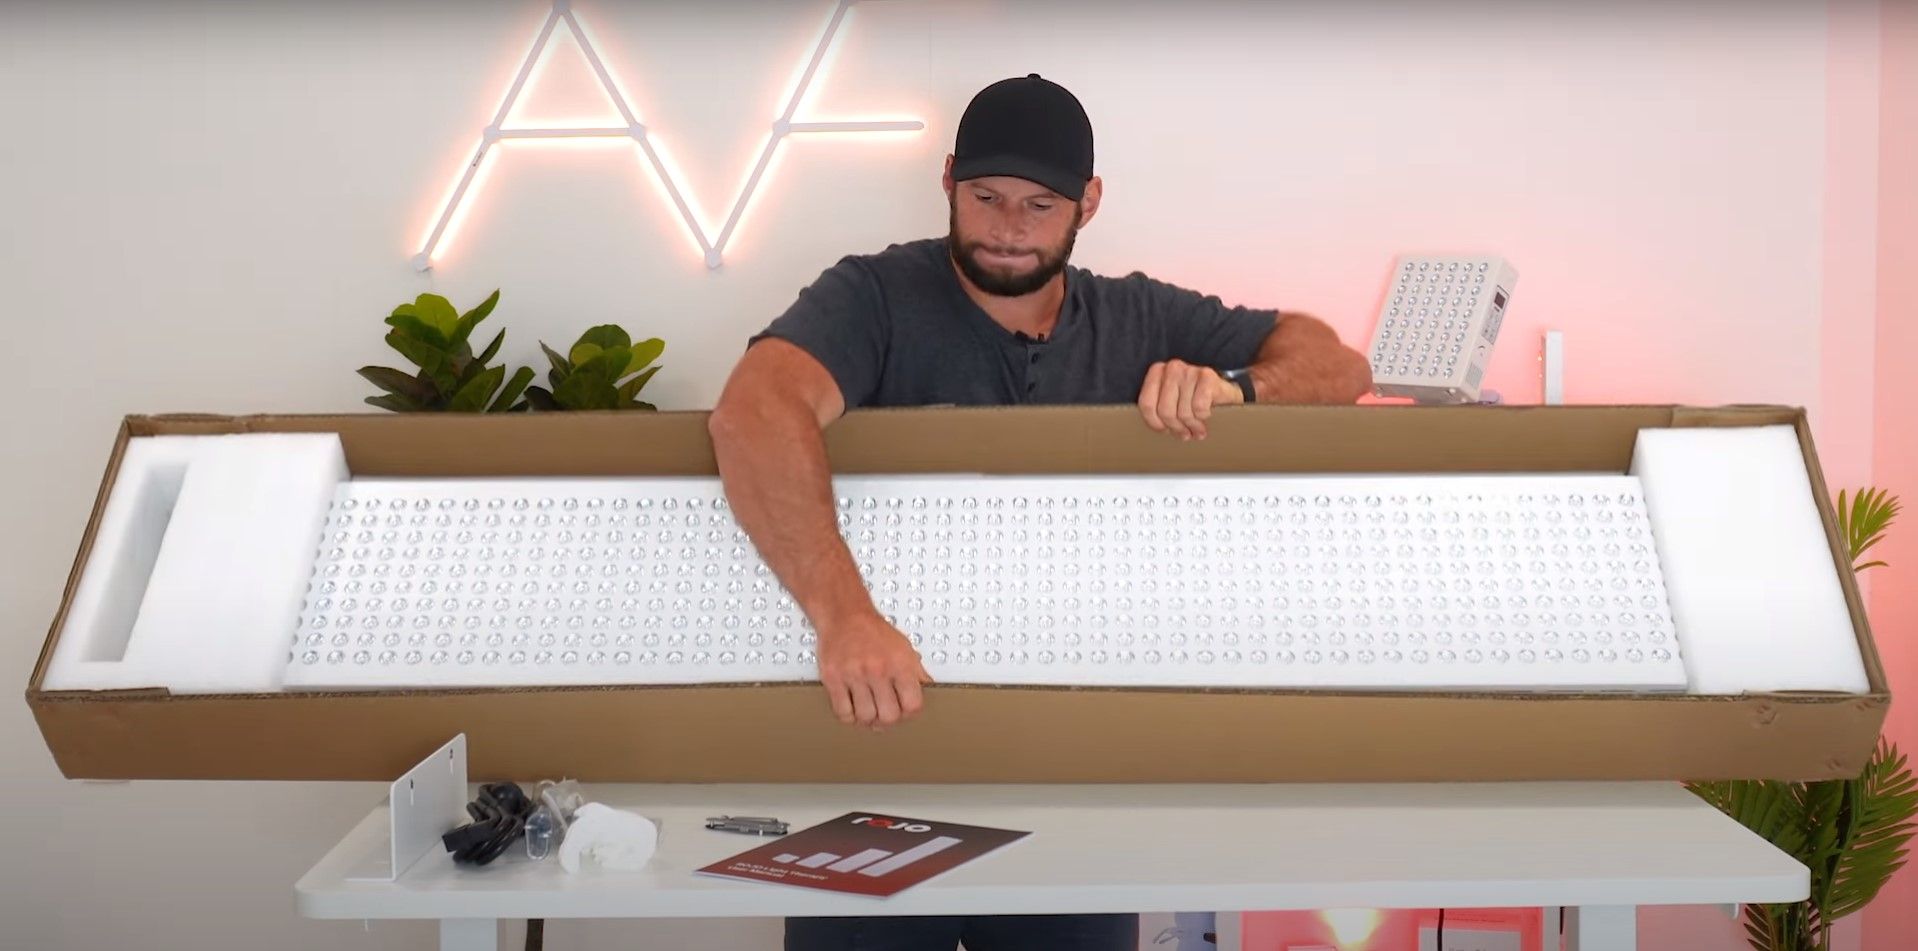 Alex Fergus unboxing a large red light therapy panel